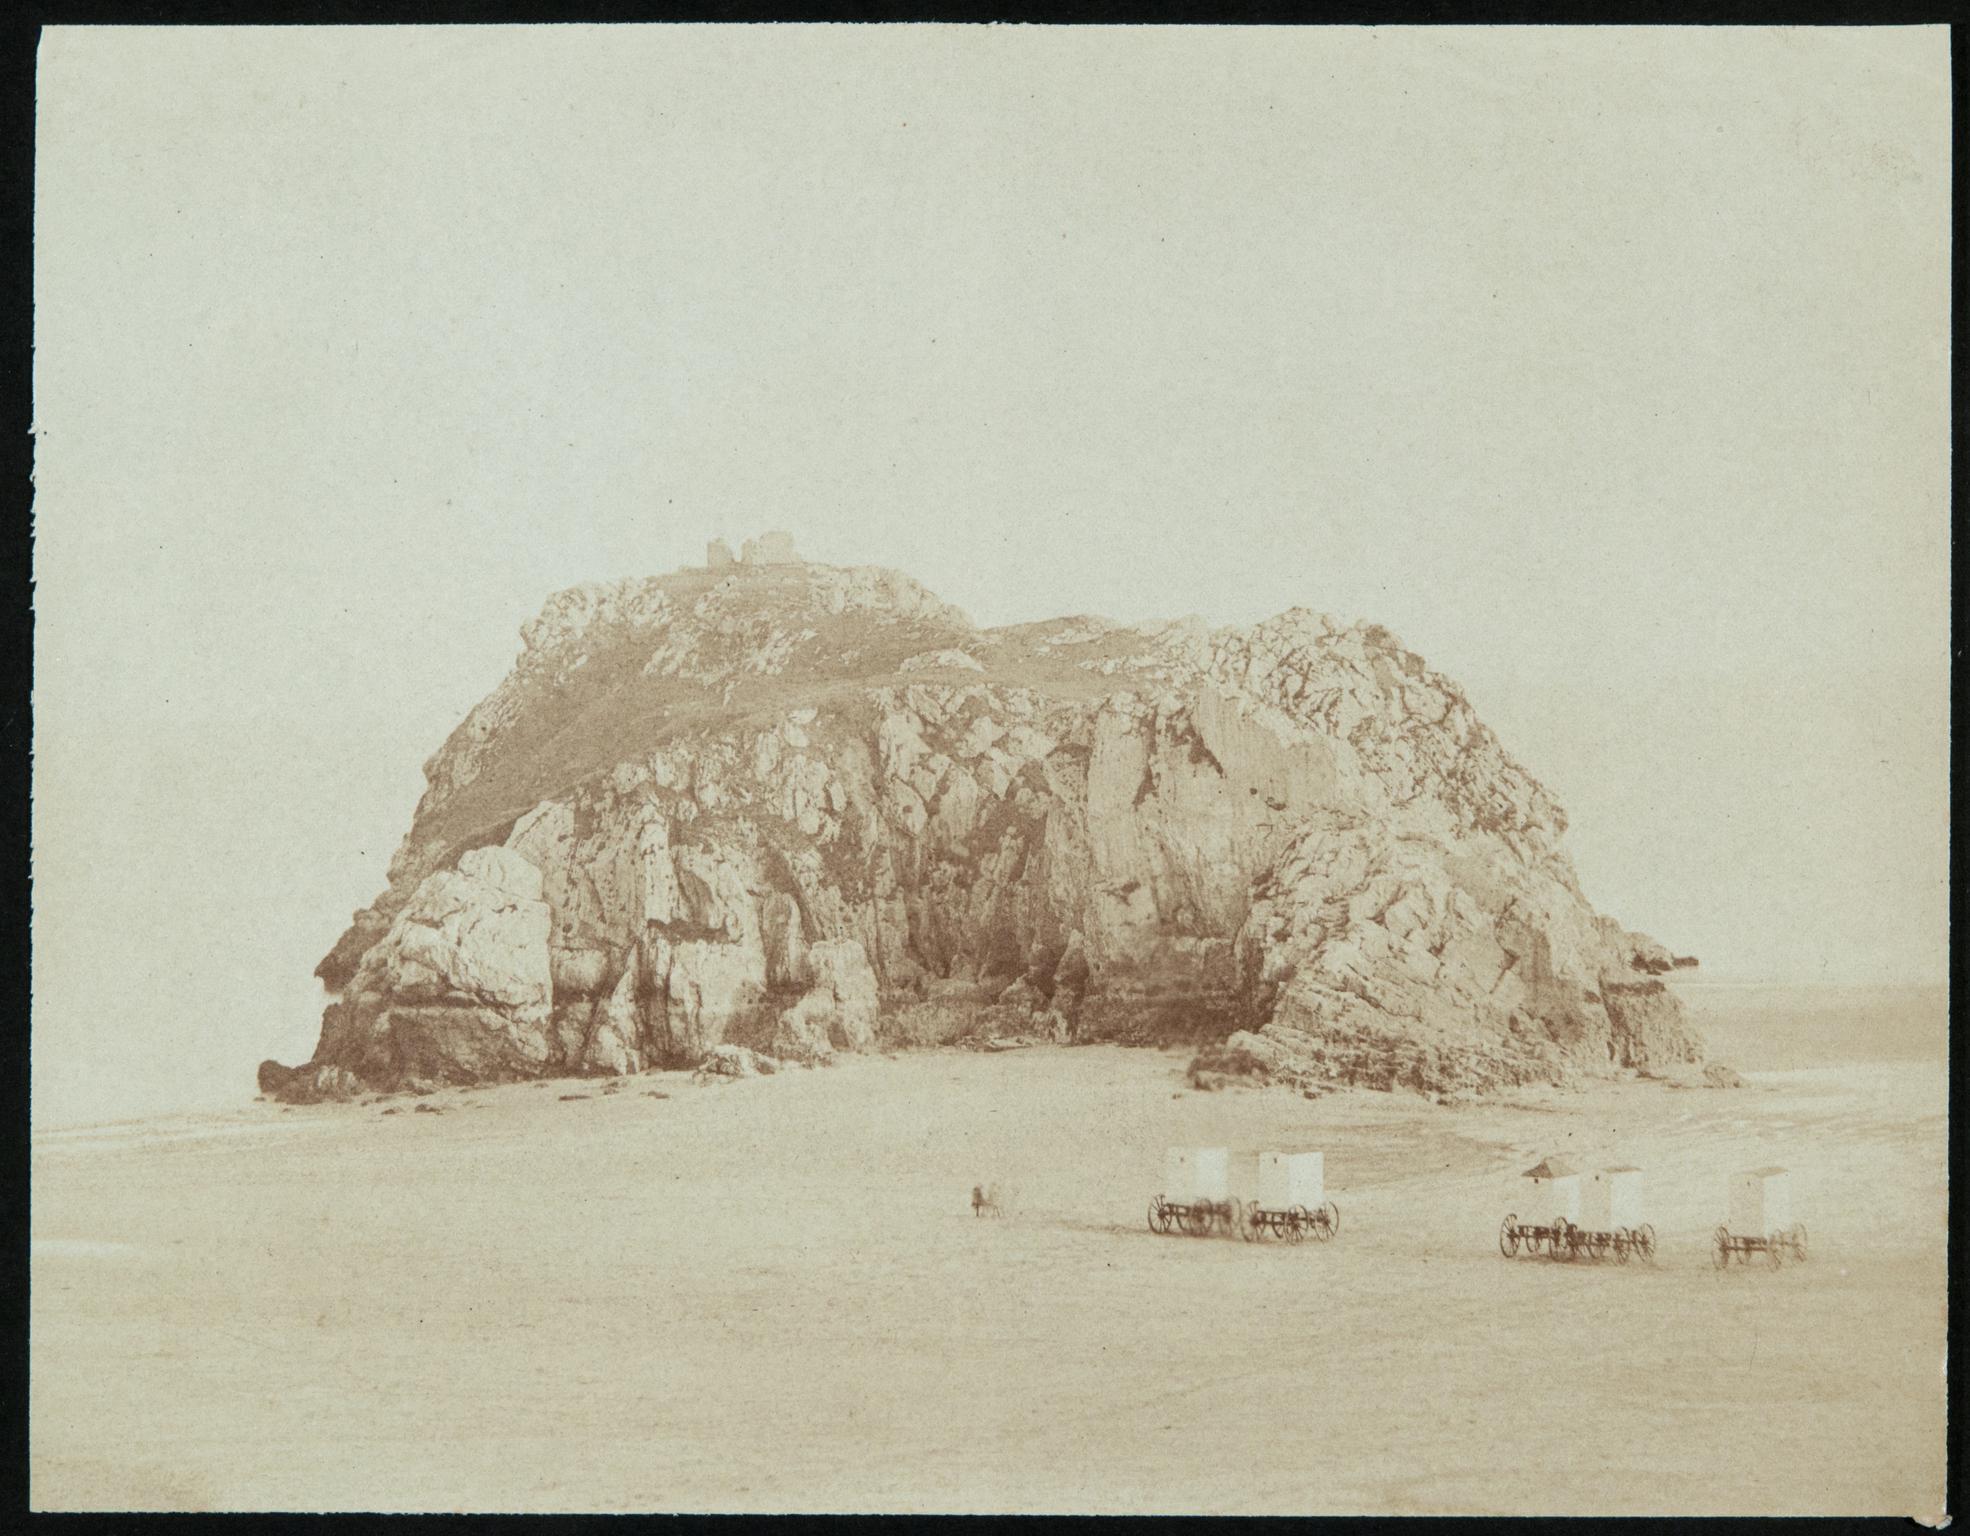 Tenby, St. Catherine's Island, photograph